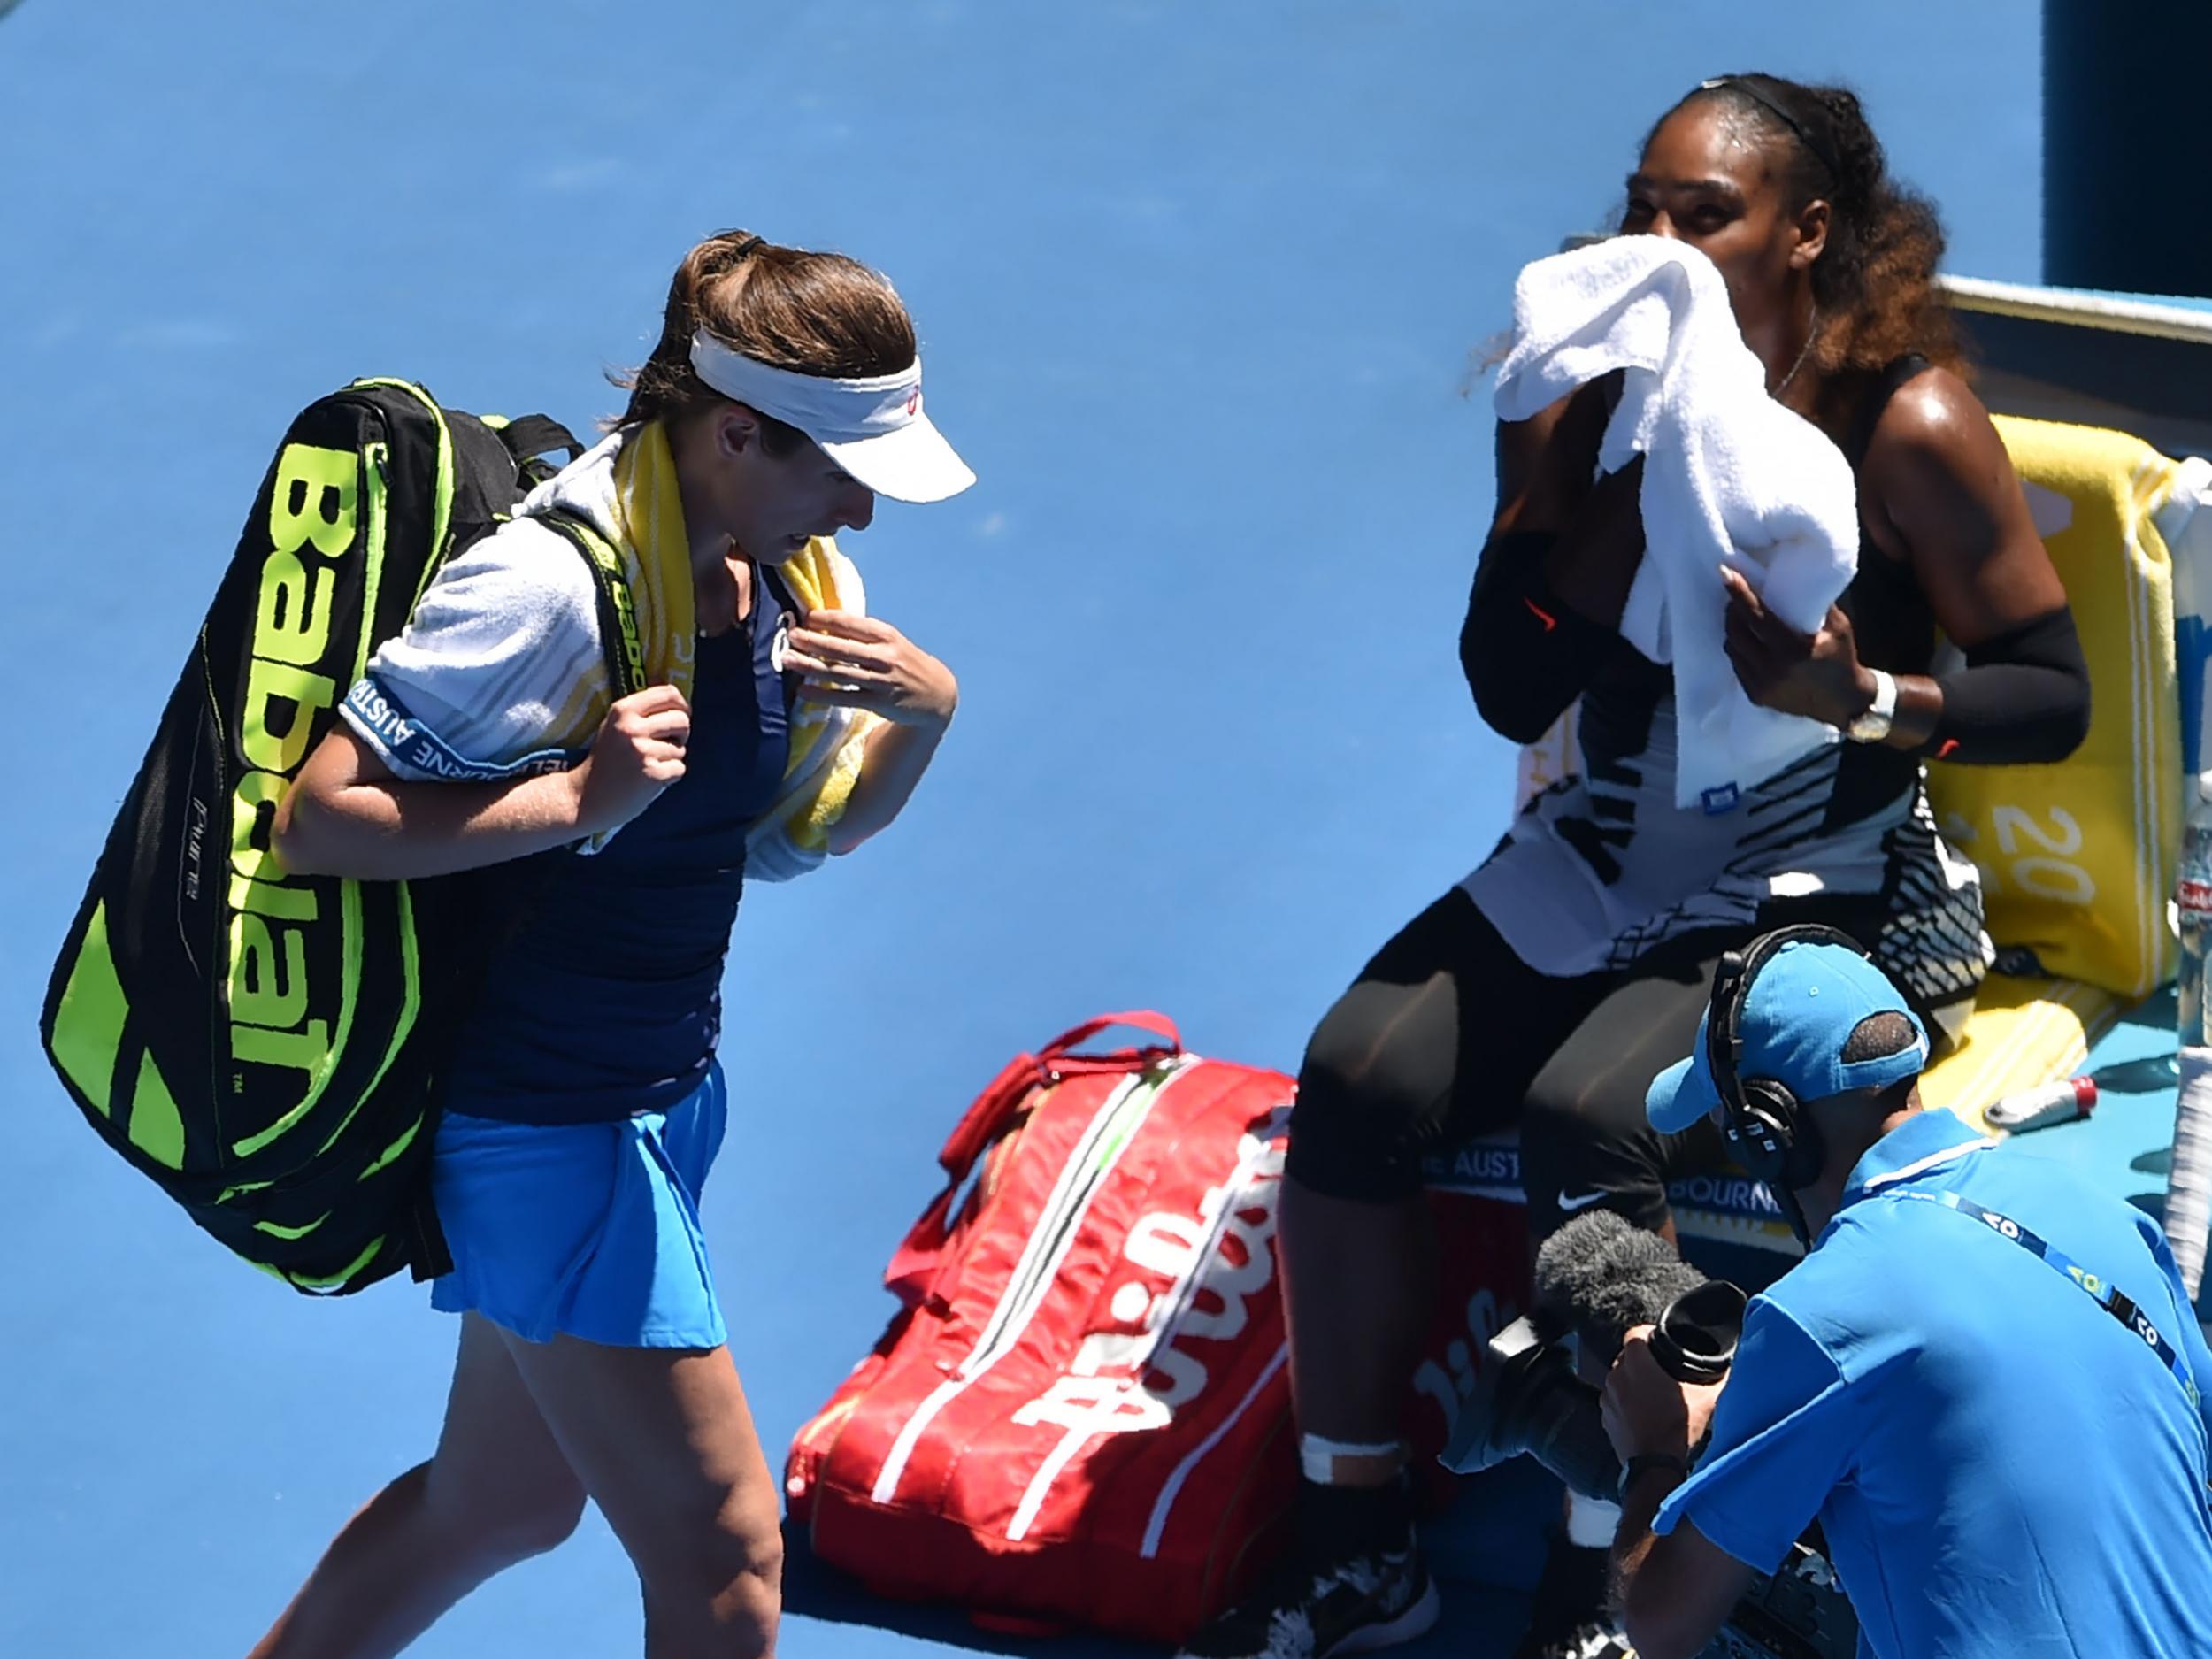 Williams always seemed at ease with Konta's aggresive baseline game